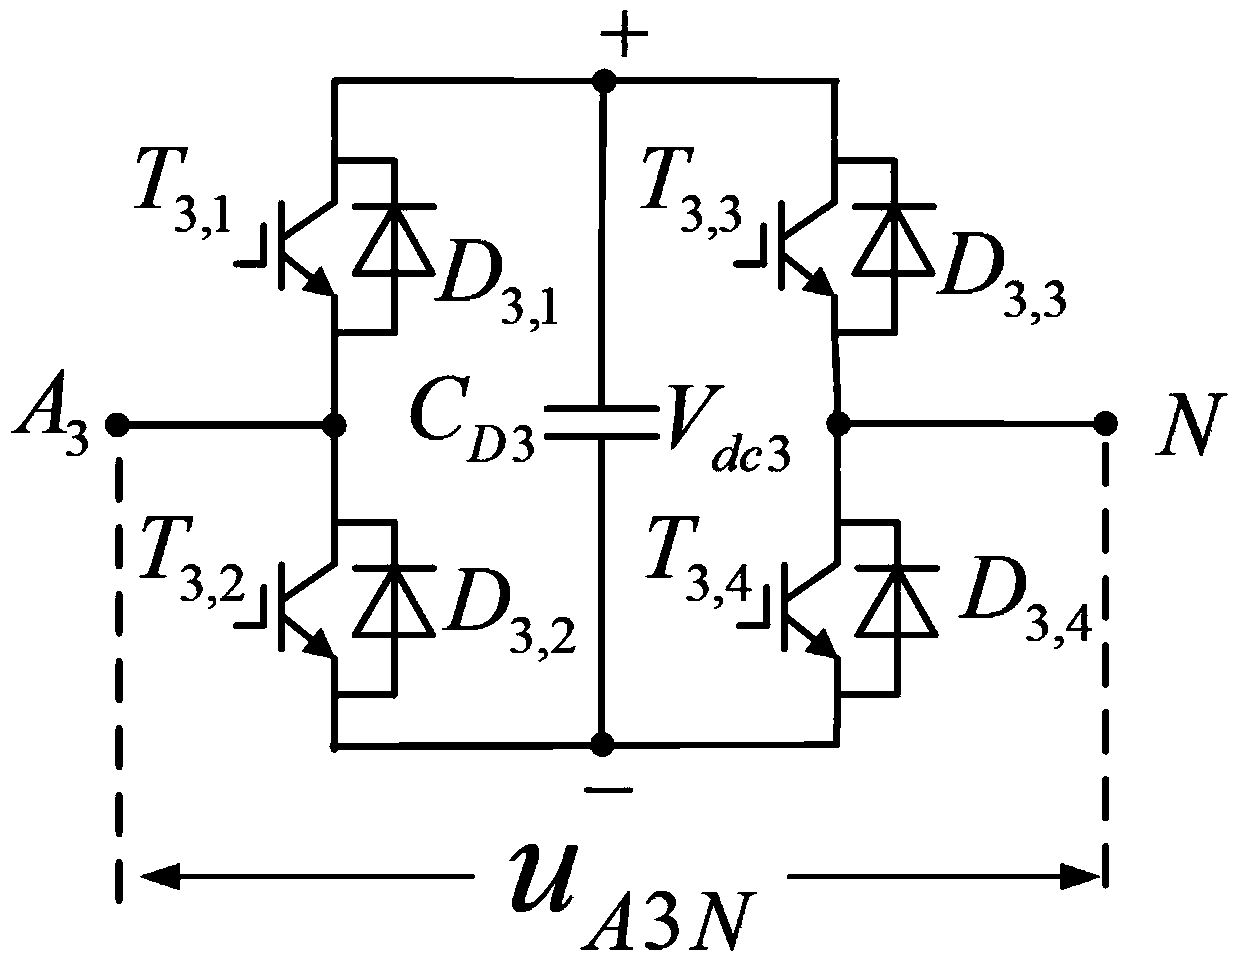 Mixing cascaded multi-electric-level converter topology and control method based on T type APF